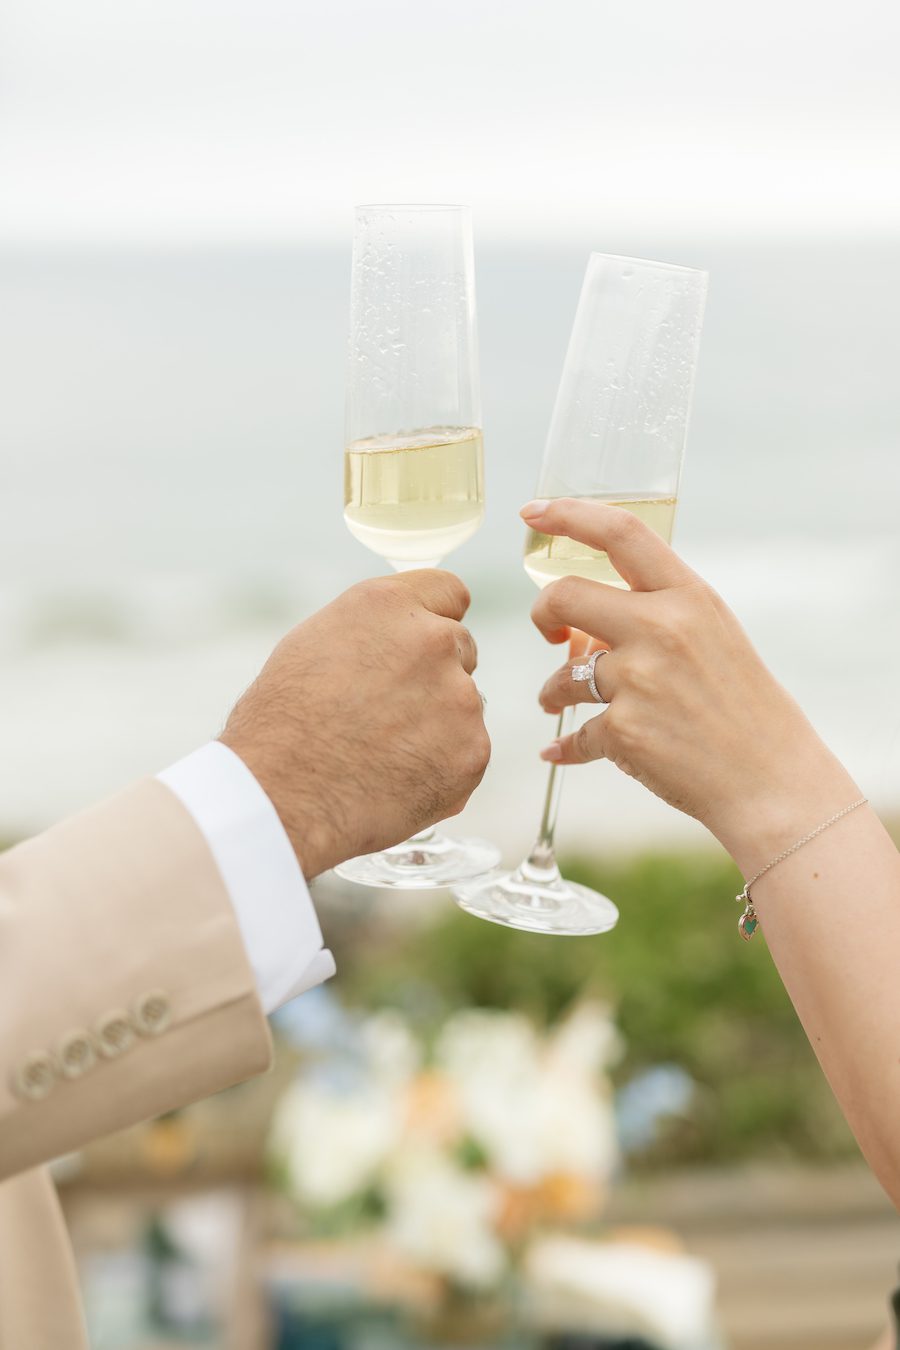  Ocean View Picnic Proposal in OC California. Charcuterie board and champagne toast